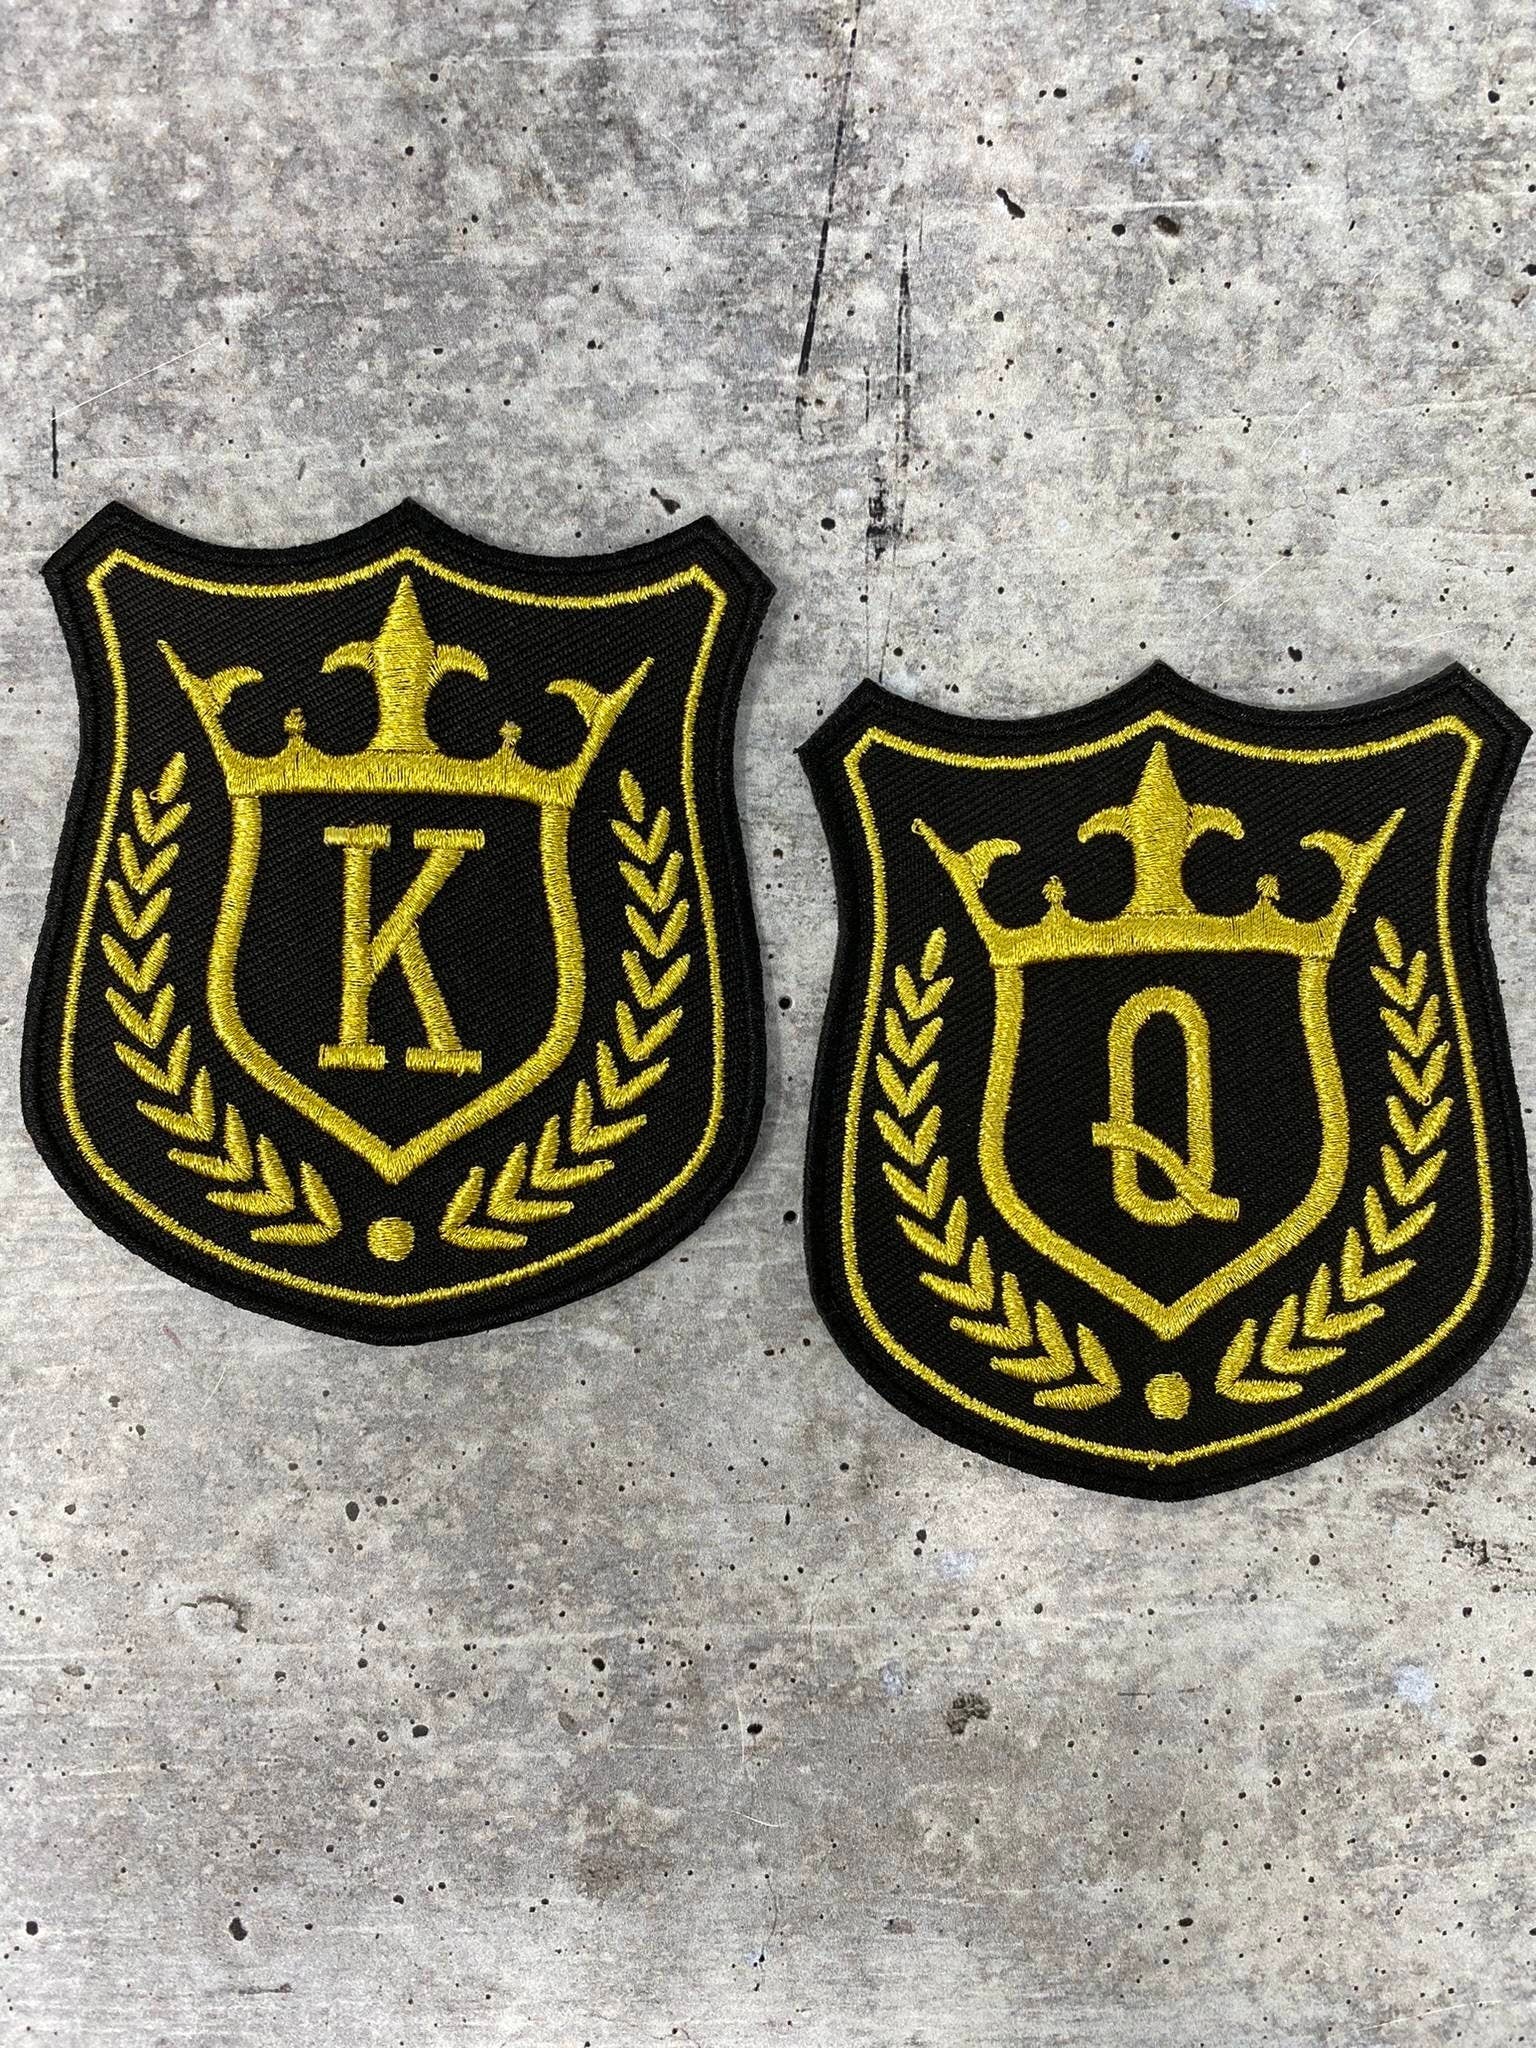 New, Gold Royal "Q" (QUEEN), 1-pc, Metallic Royalty Crest, Size 3.5", Iron-on Embroidered Patch, Patch for Jackets, Hats, and More